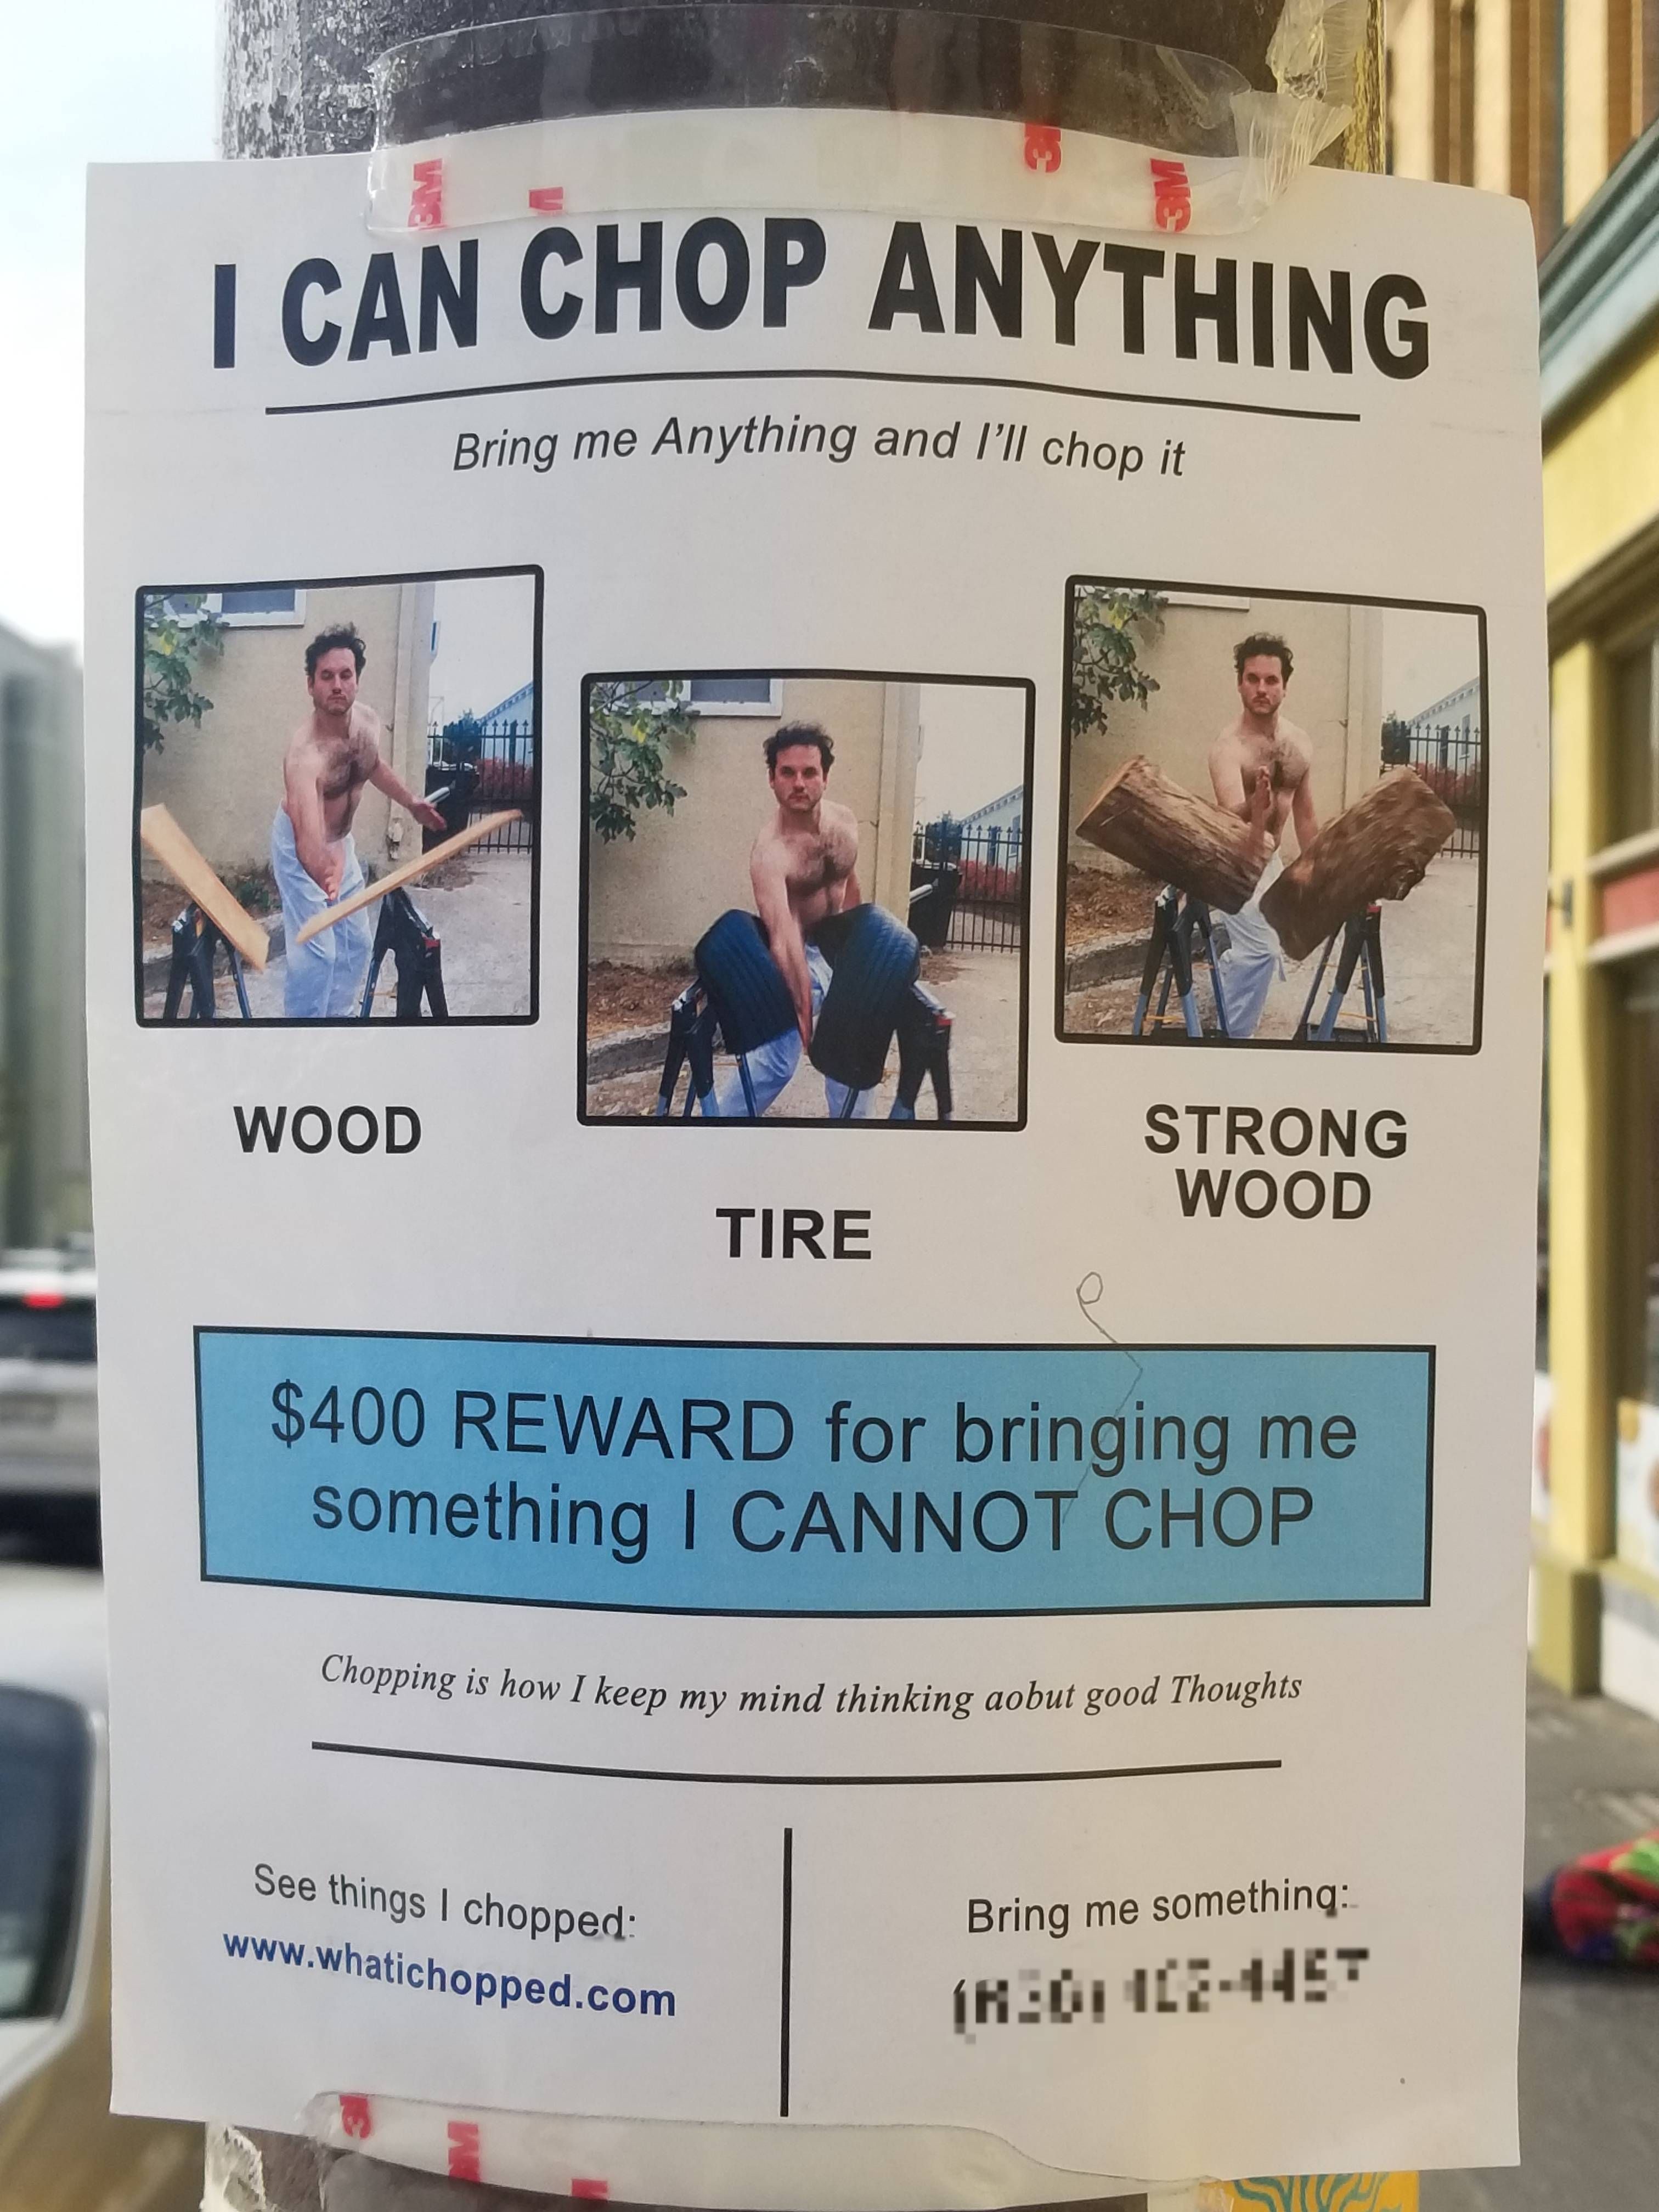 I CAN CHOP ANYTHING